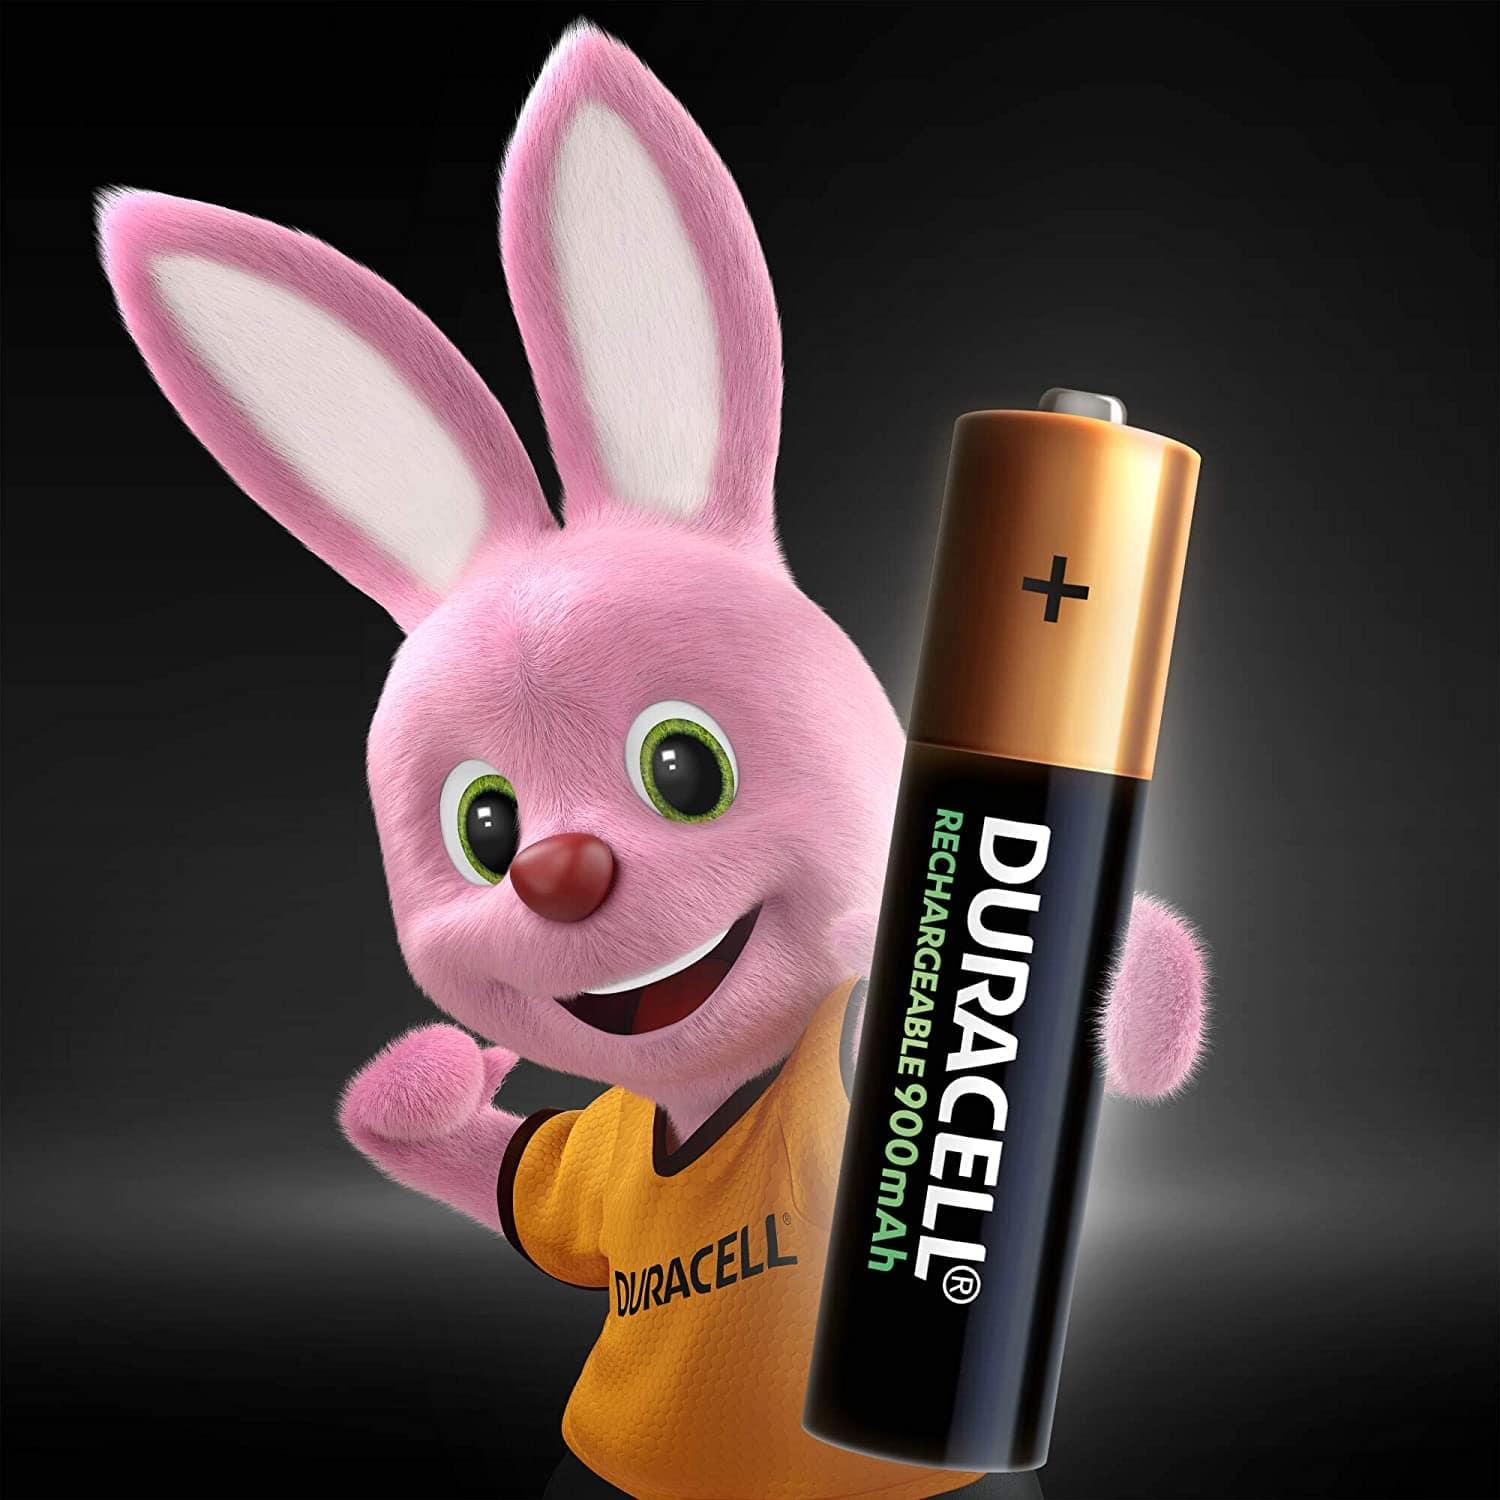 Duracell Rechargeable AA 2500mAh Batteries, Pack of 2-Battery-dealsplant